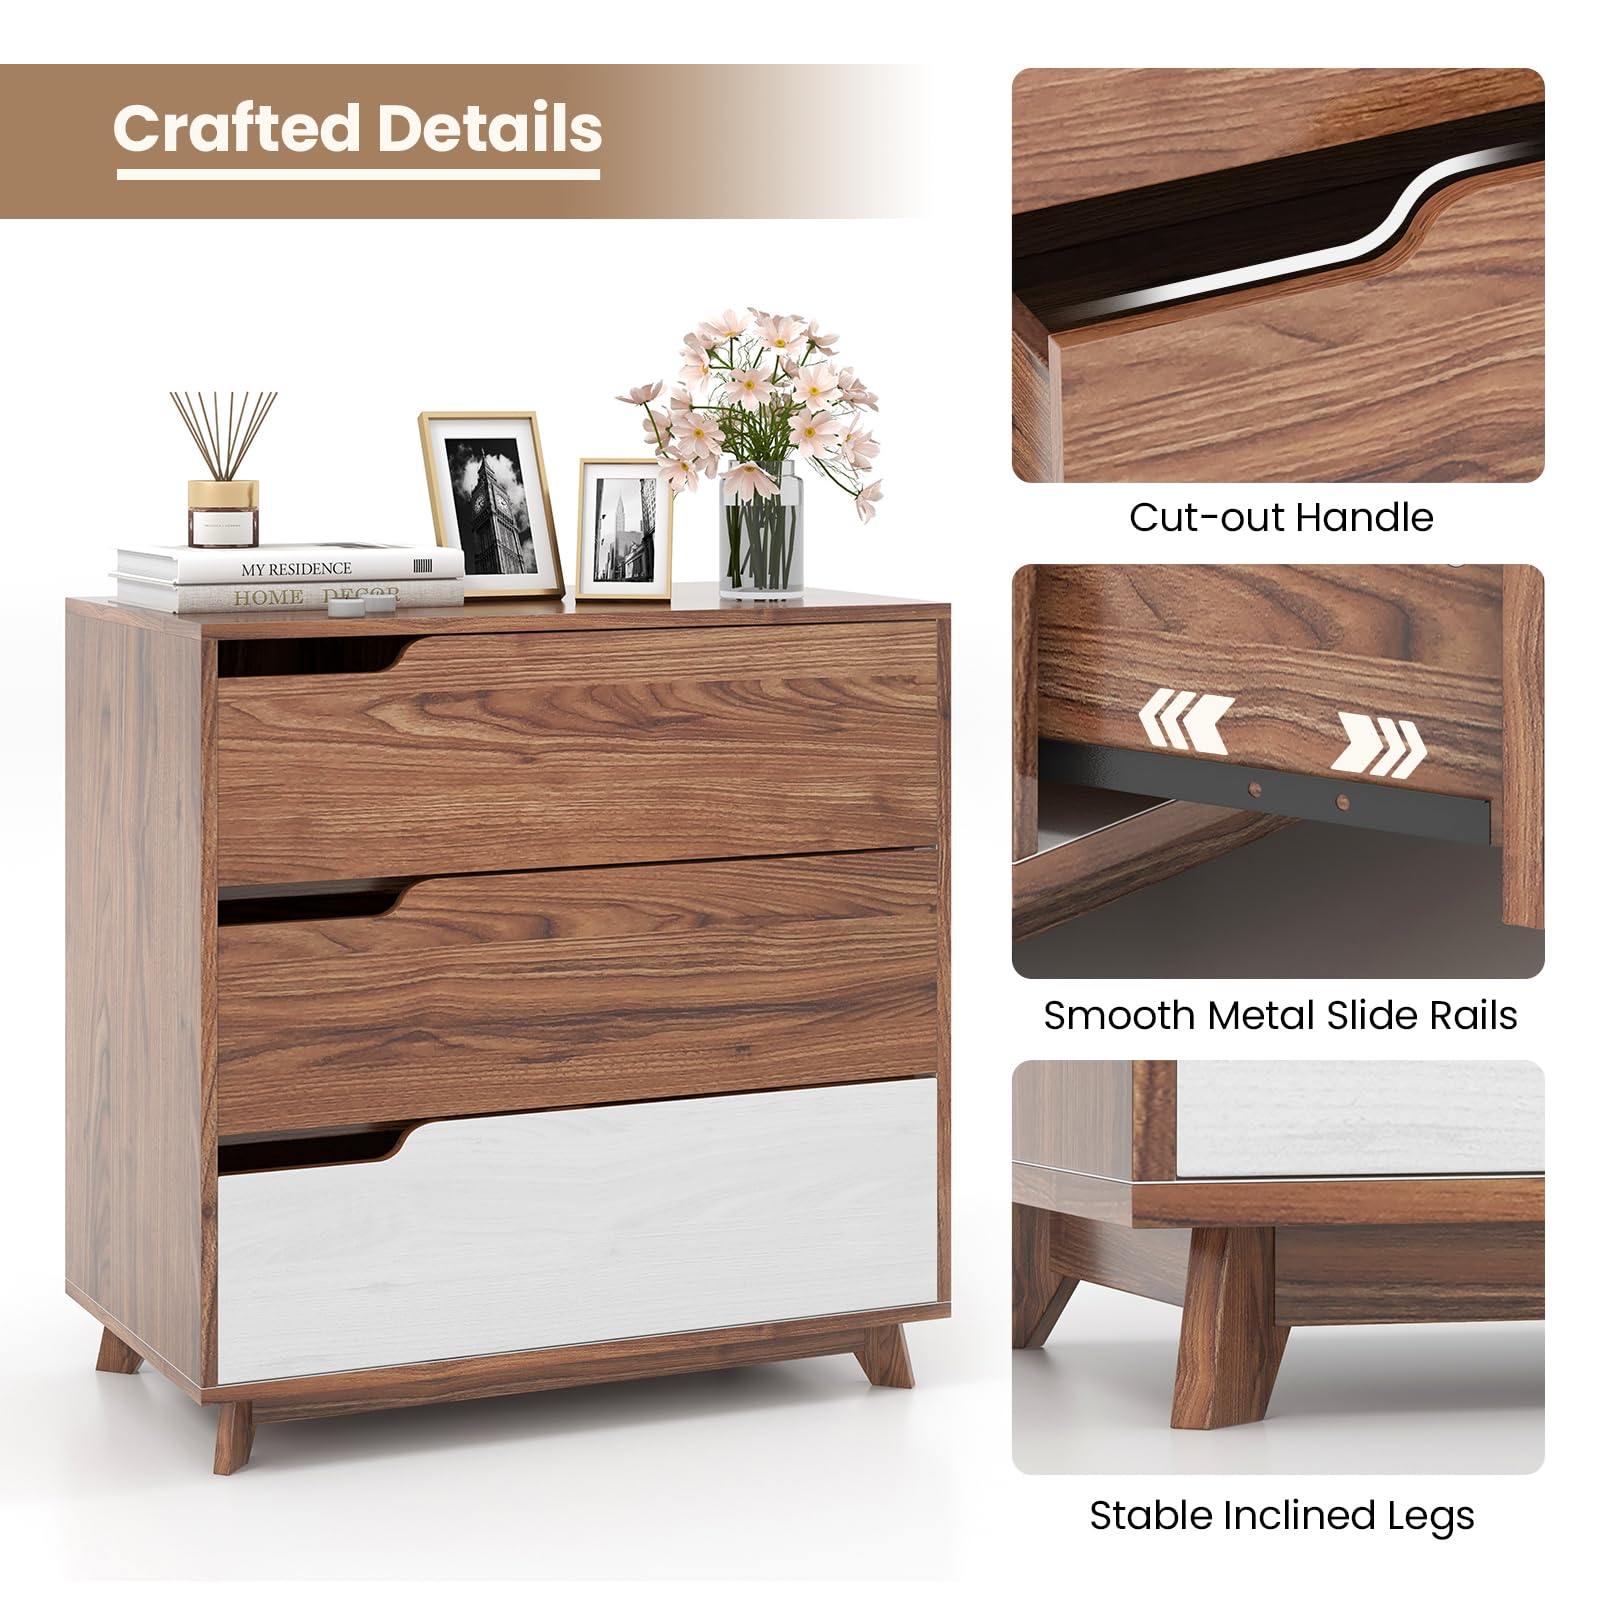 Giantex 3-Drawer Dresser for Bedroom - Small Chest of Drawers, Rustic Farmhouse Storage Cabinet, Walnut & White